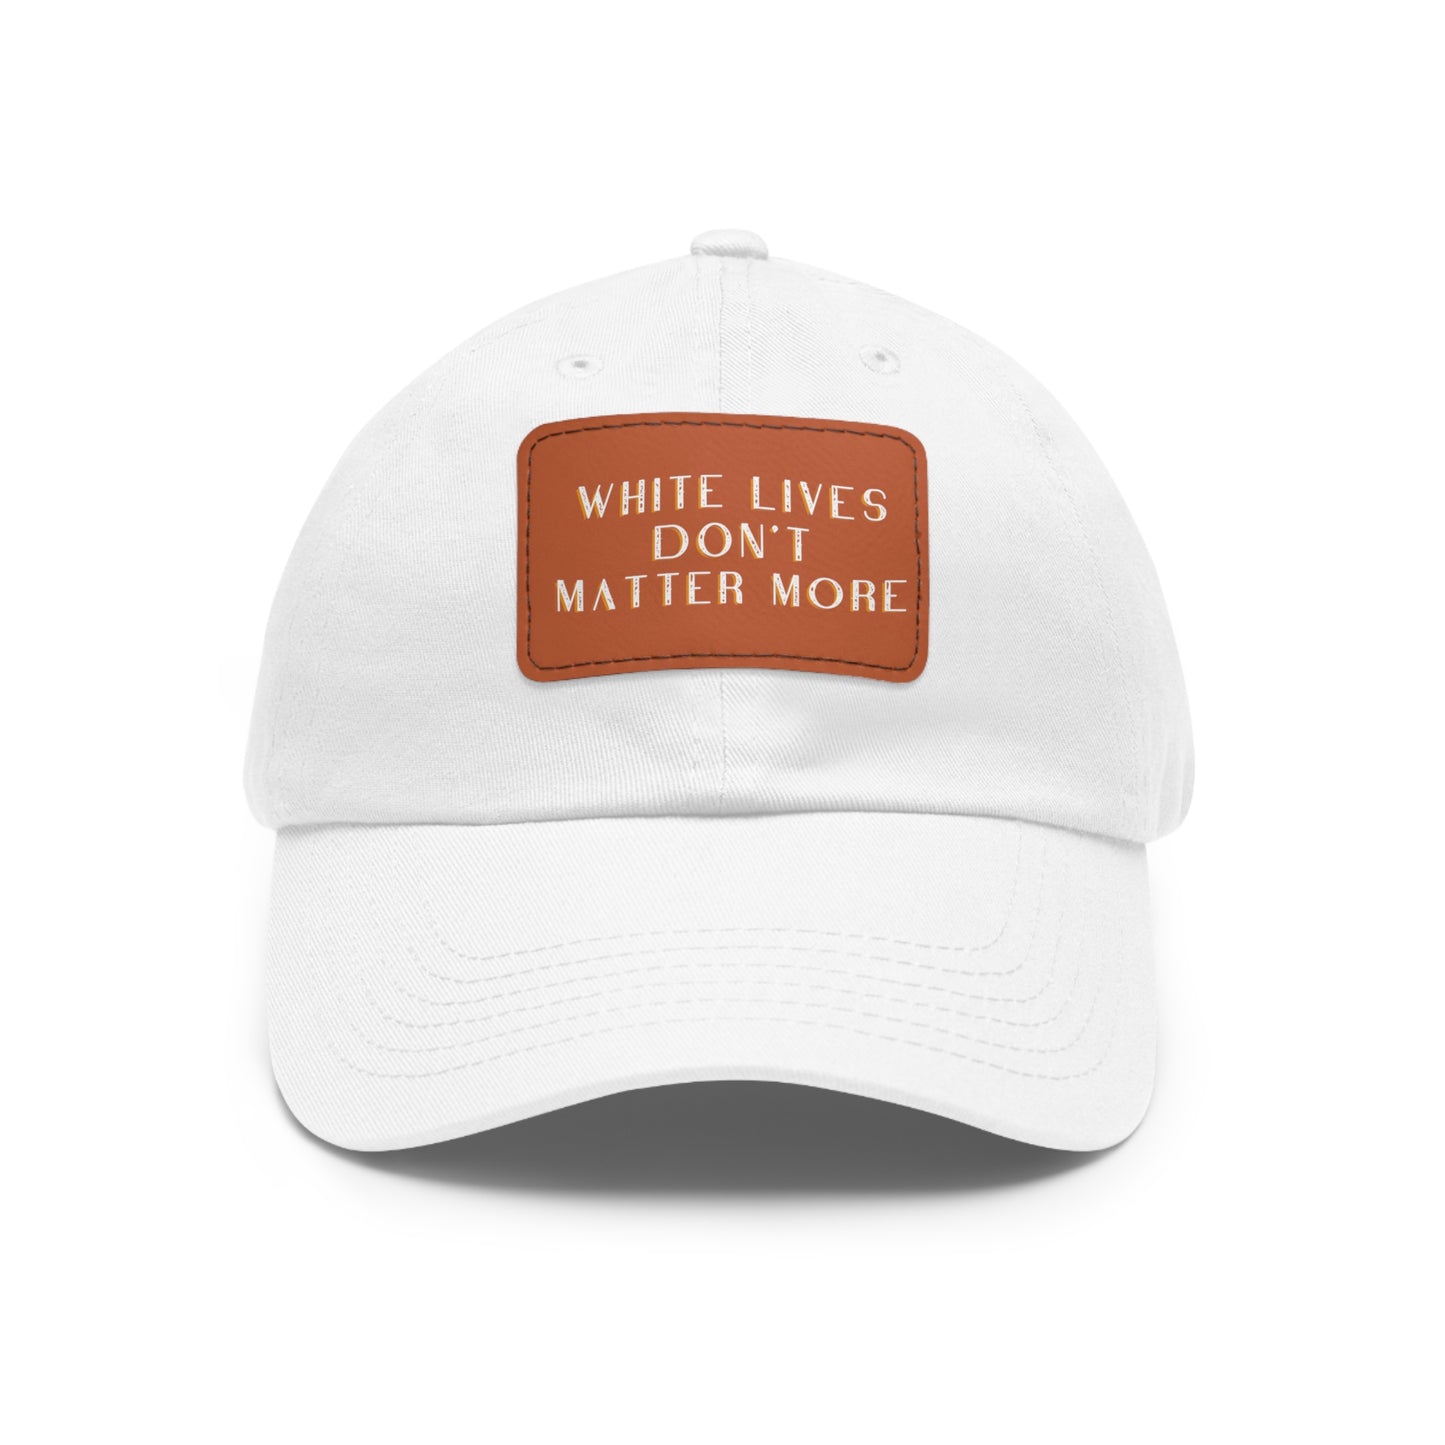 "White Lives Don't Matter More" Visor CAP with Leather Patch (Rectangle)